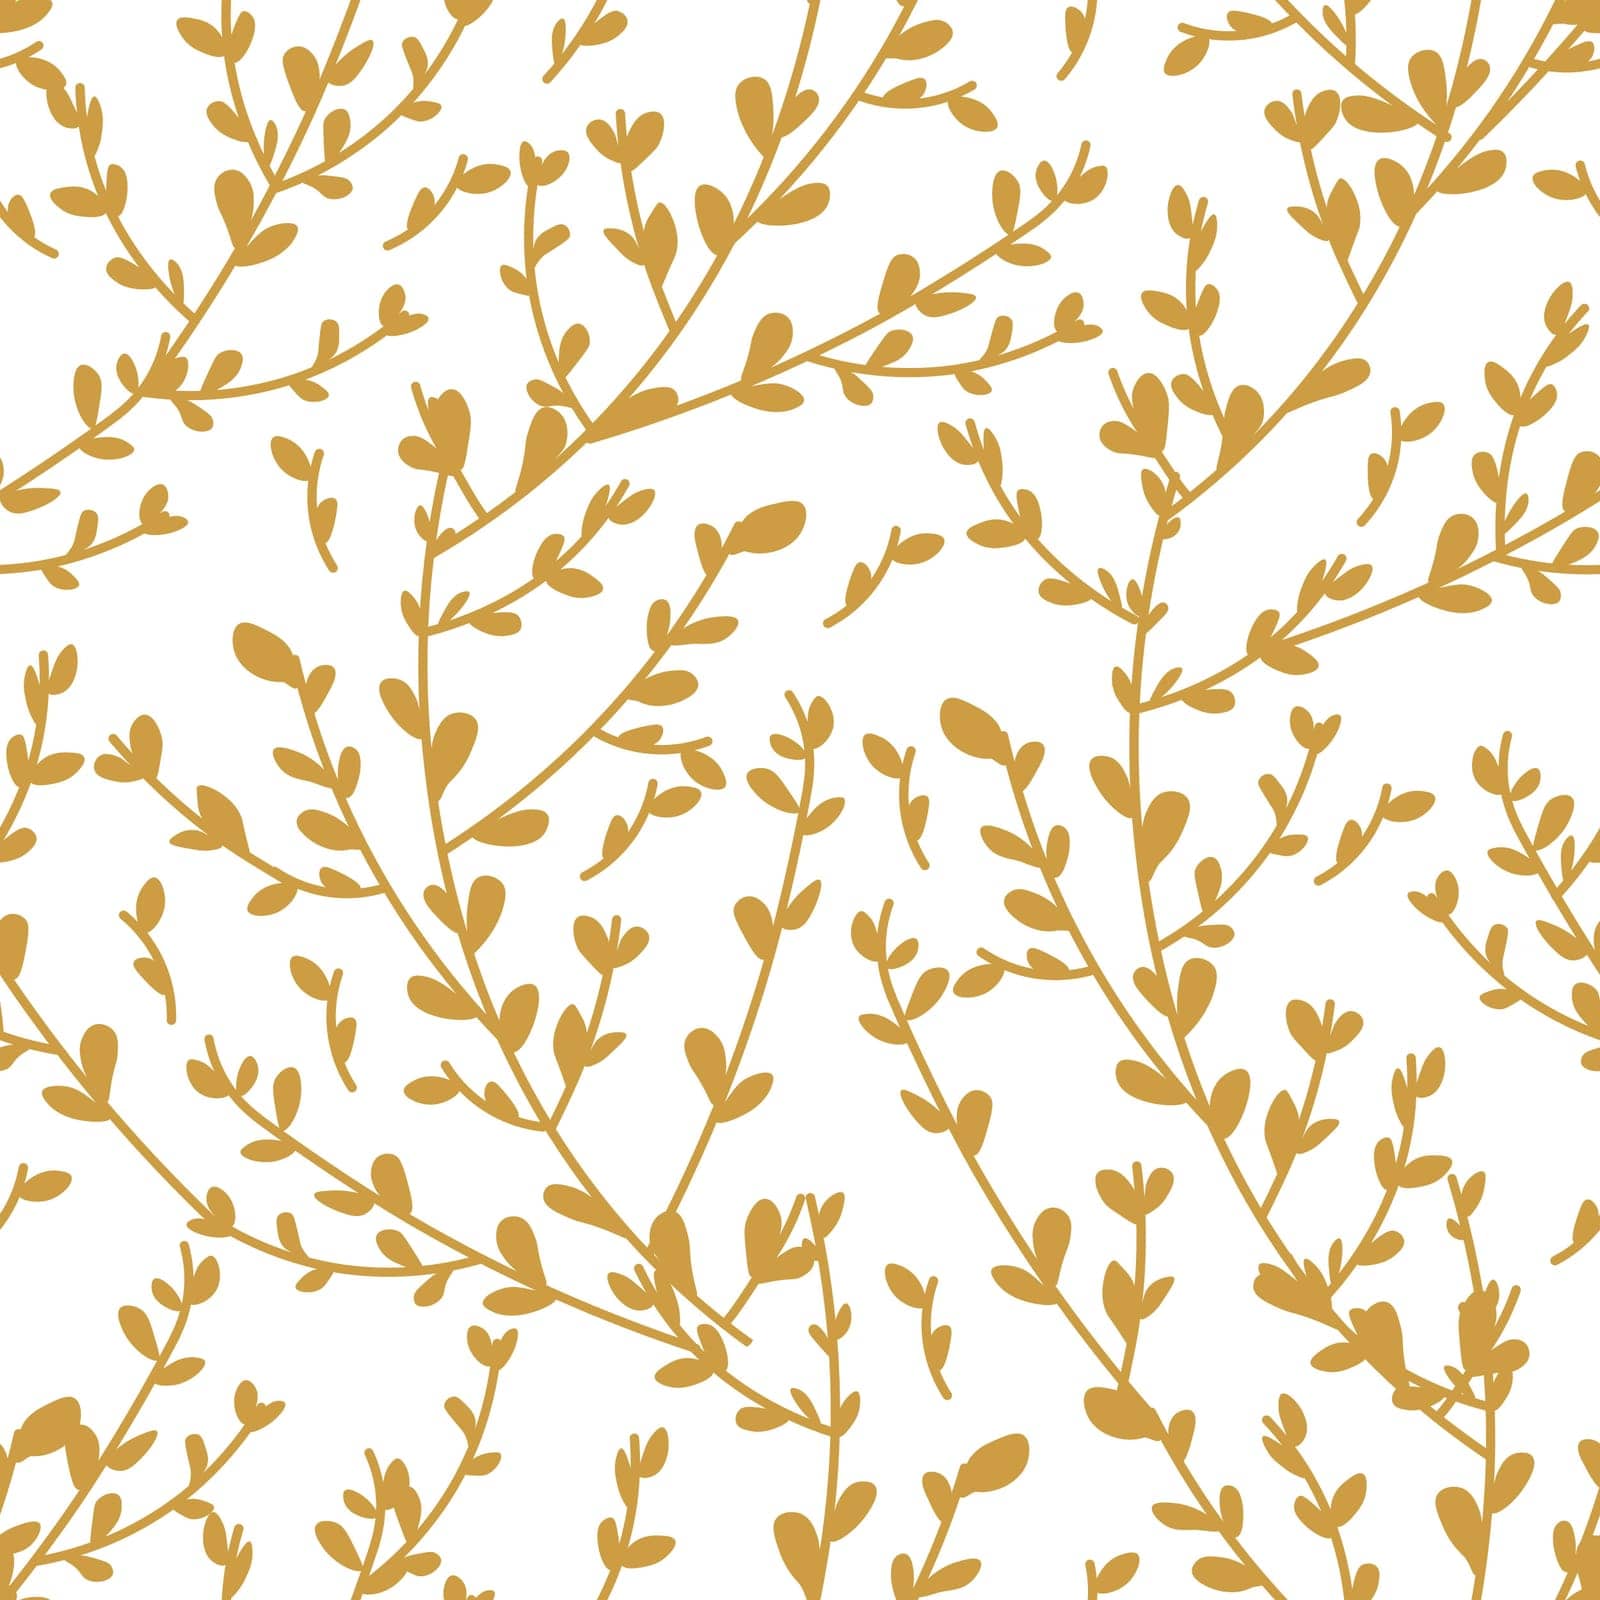 Autumn branches and twigs, yellow golden flora and foliage of forest, woods or park, garden or orchid. Seasonal background or print, wallpaper or textile seamless pattern. Vector in flat style